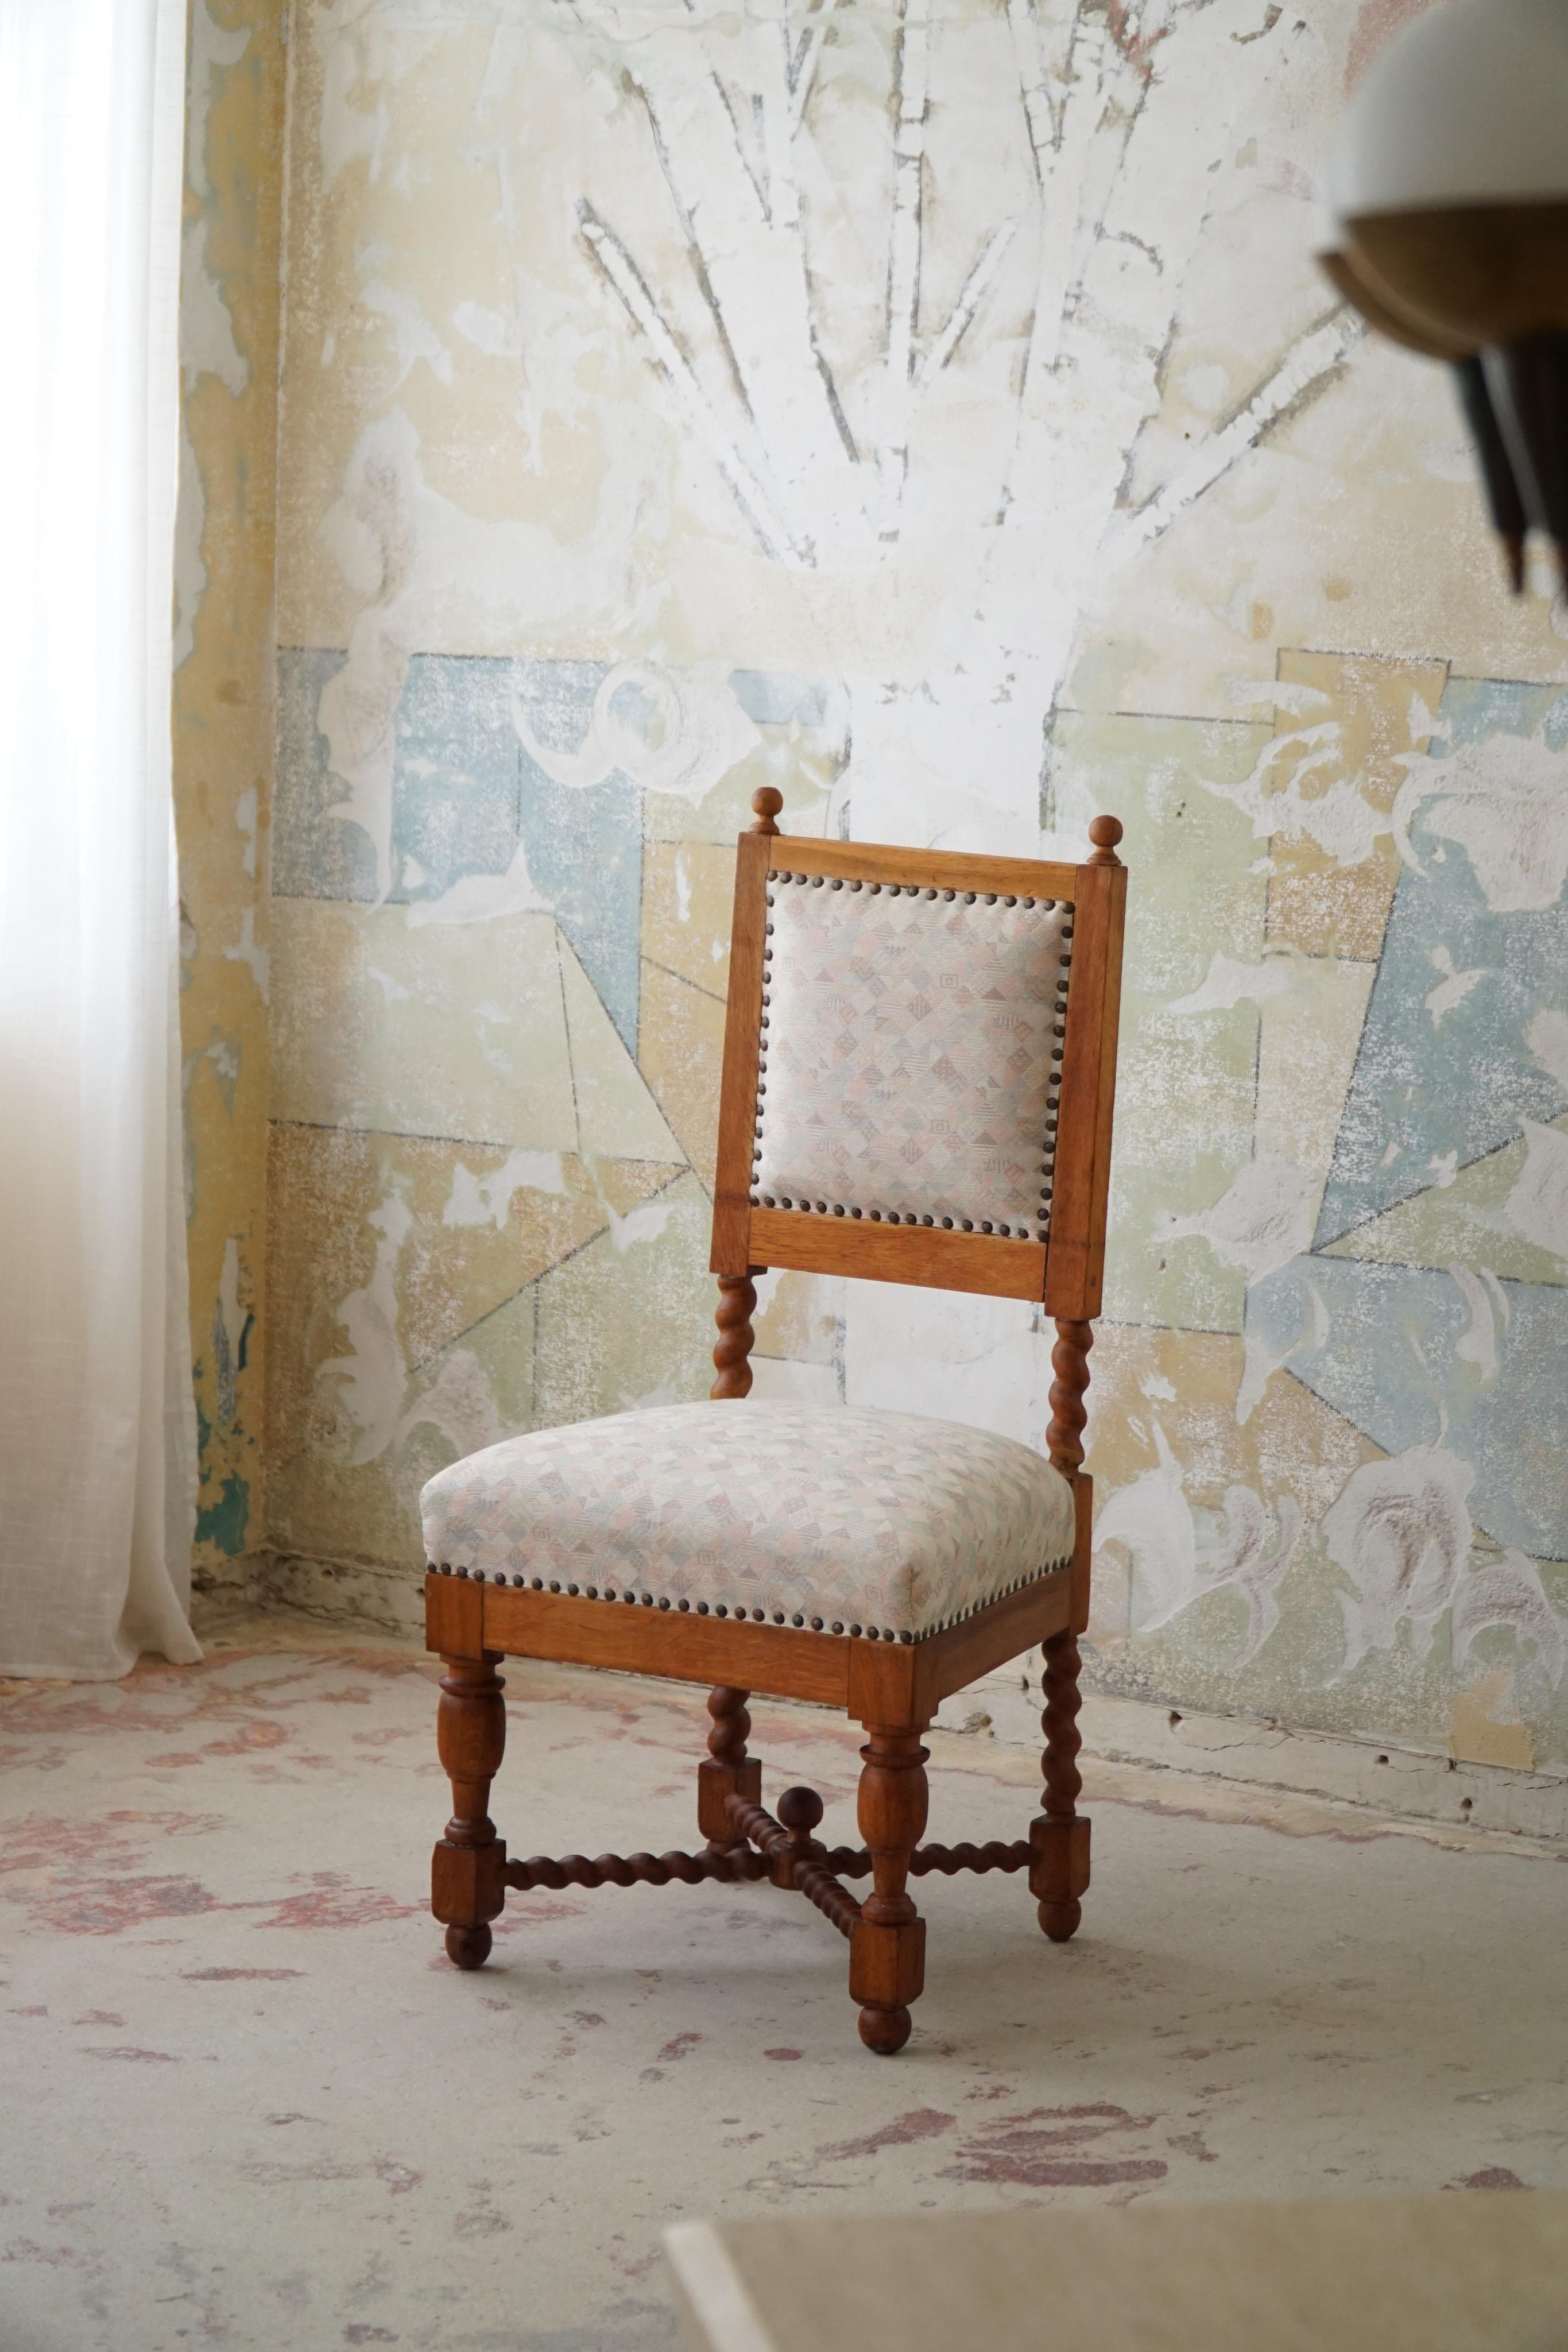 Exquisite and timeless, the Baroque-style English chair with barley-twisted legs in oak from the 1920s encapsulates the grandeur and craftsmanship of a bygone era. This chair is a testament to the opulence and attention to detail that defined the